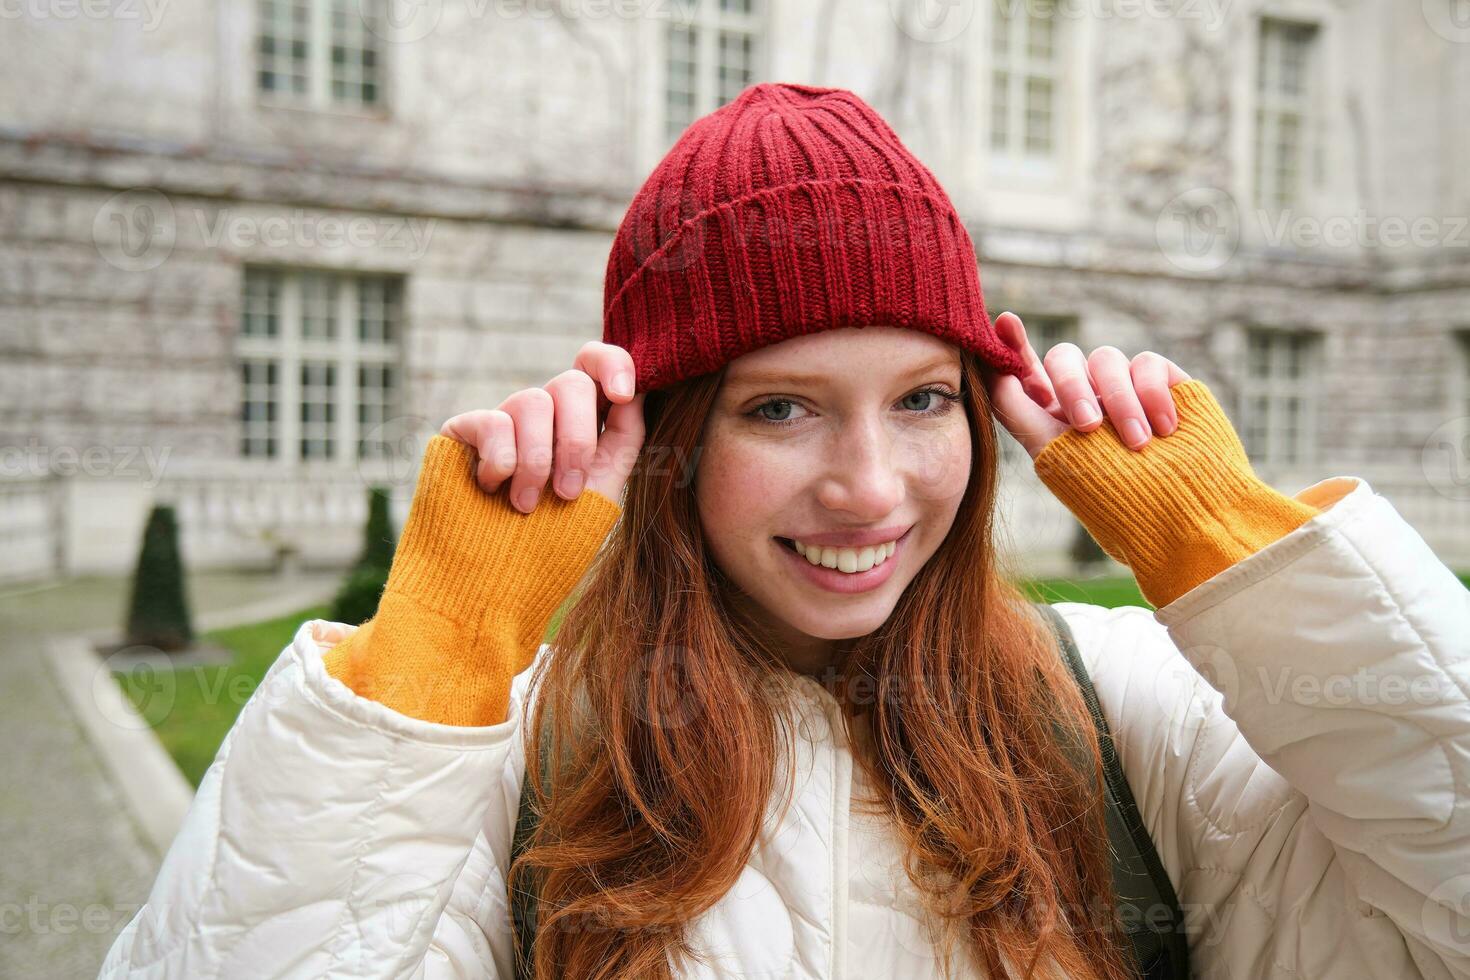 Young smiling redhead woman walking in beautiful city attractions, wearing backpack, red hat and coat, looking around with happy face photo